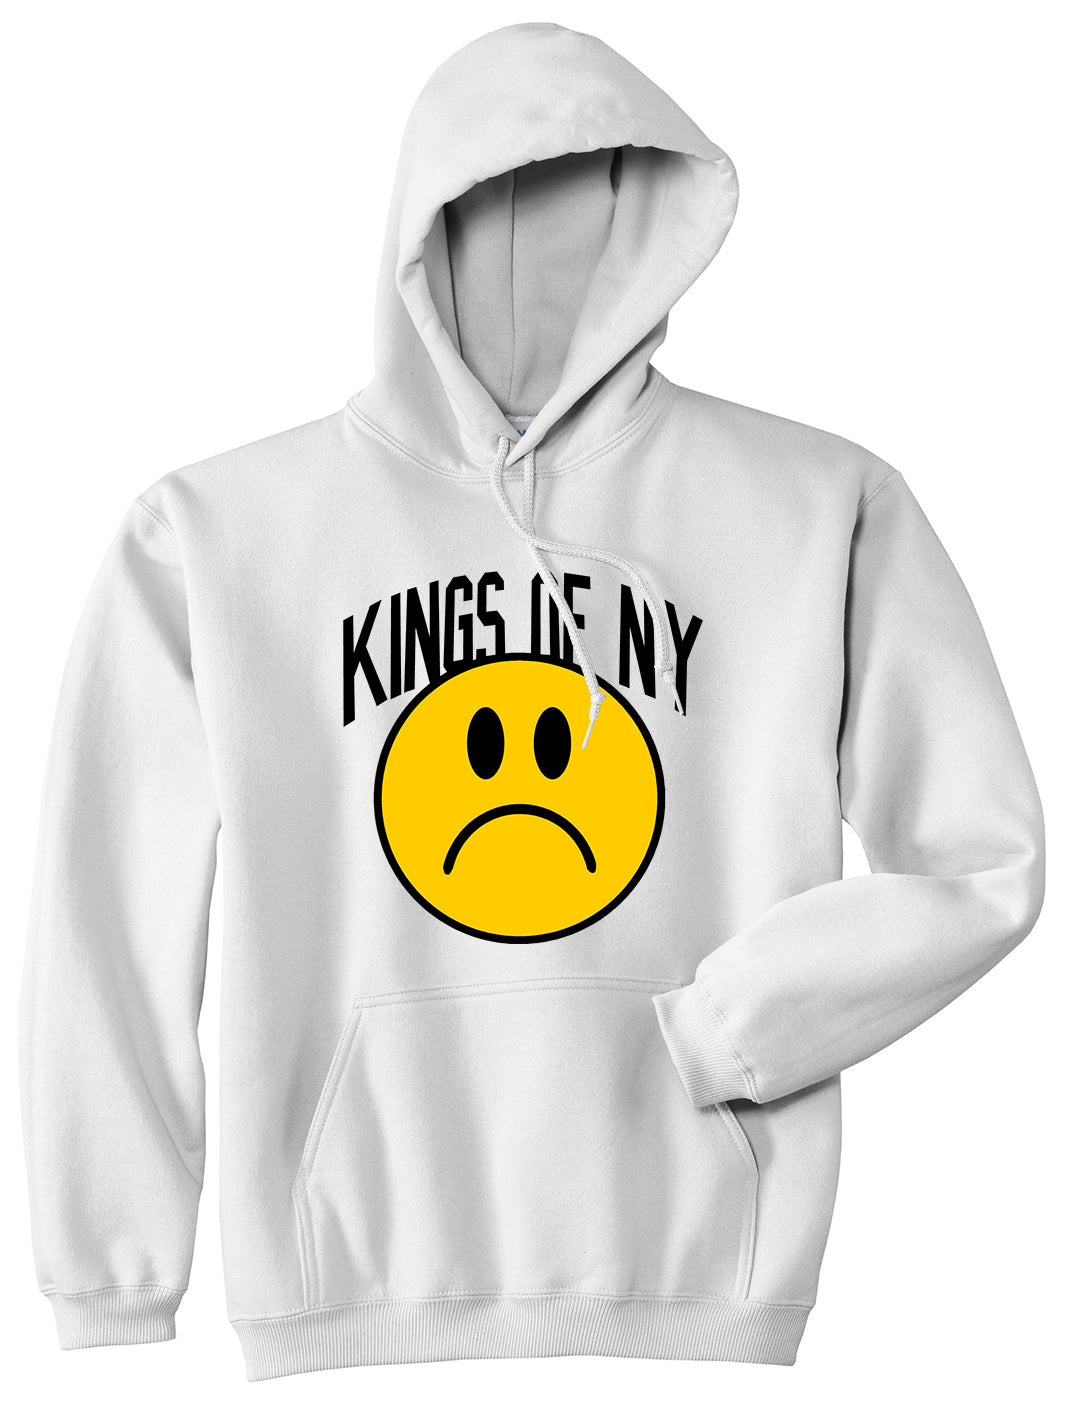 Im Upset Sad Face Mens Pullover Hoodie White by Kings Of NY